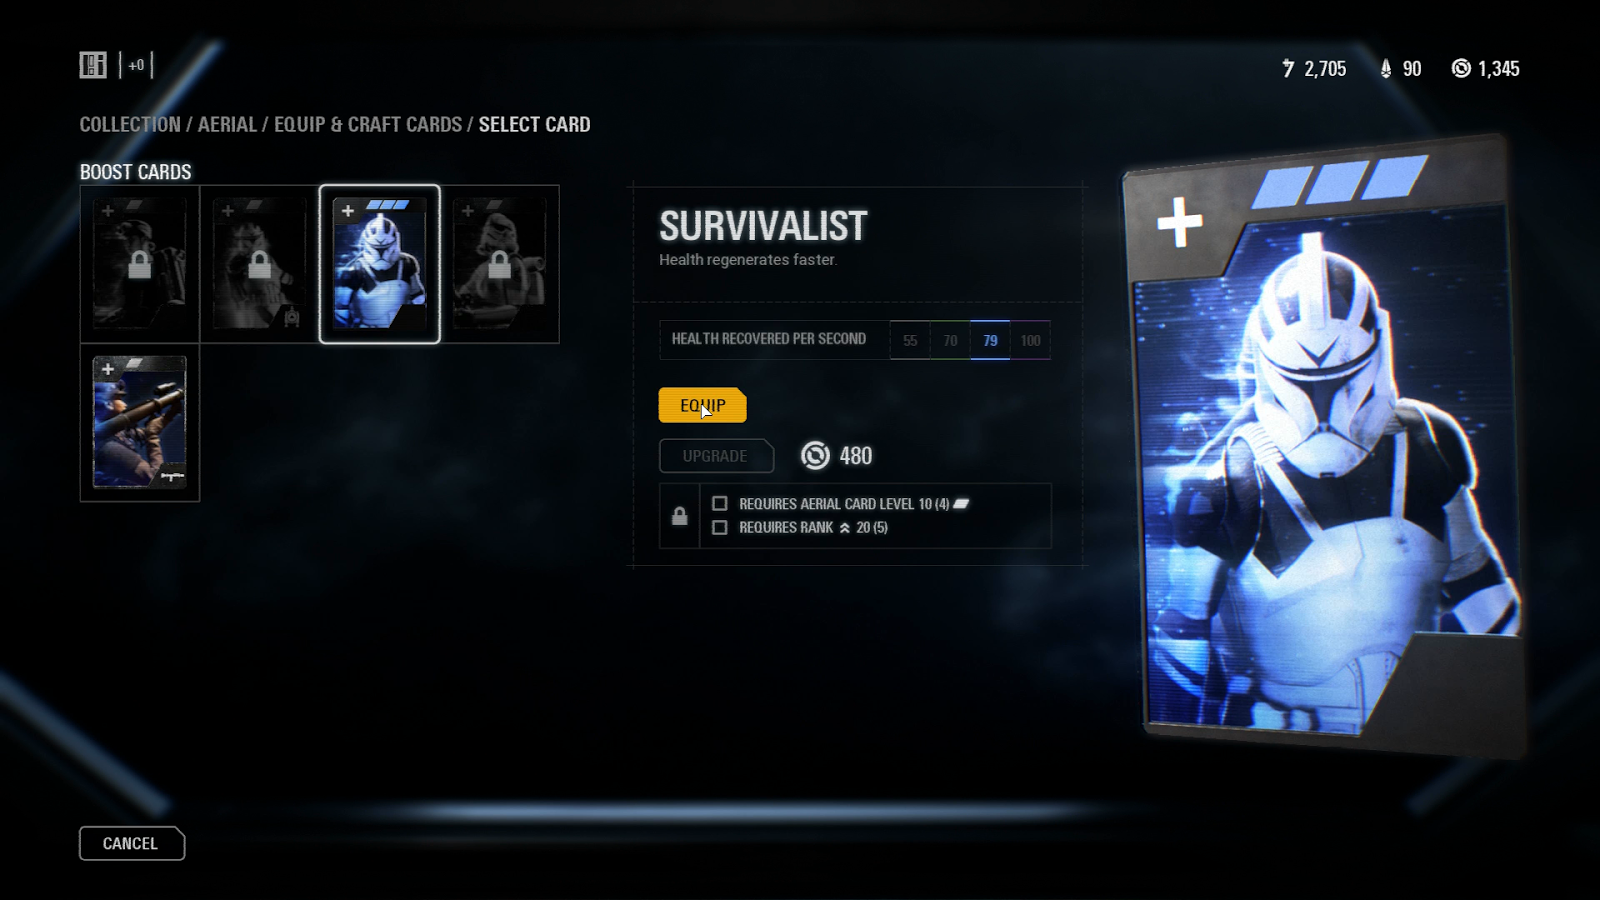 Star Wars Battlefront 2 Lets You Pay Real Money For Multiplayer Advantages